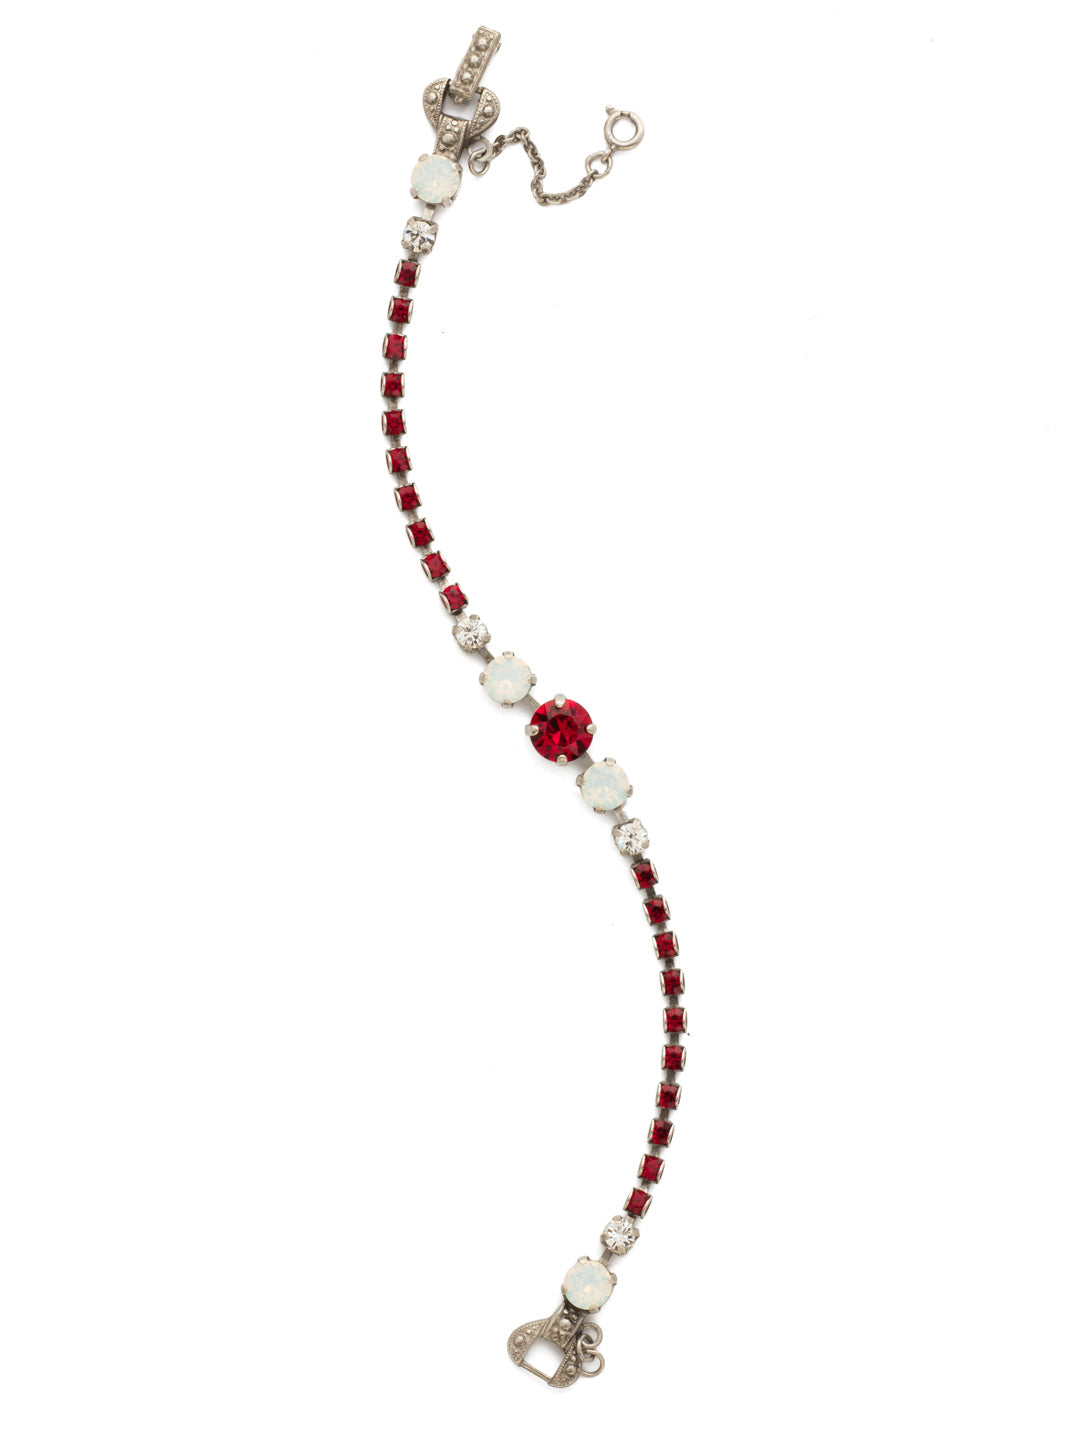 Round Up Bracelet - BDU47ASCP - Petite round crystals in a variety of settings adorn four larger crystal orbs to form this sleek style.